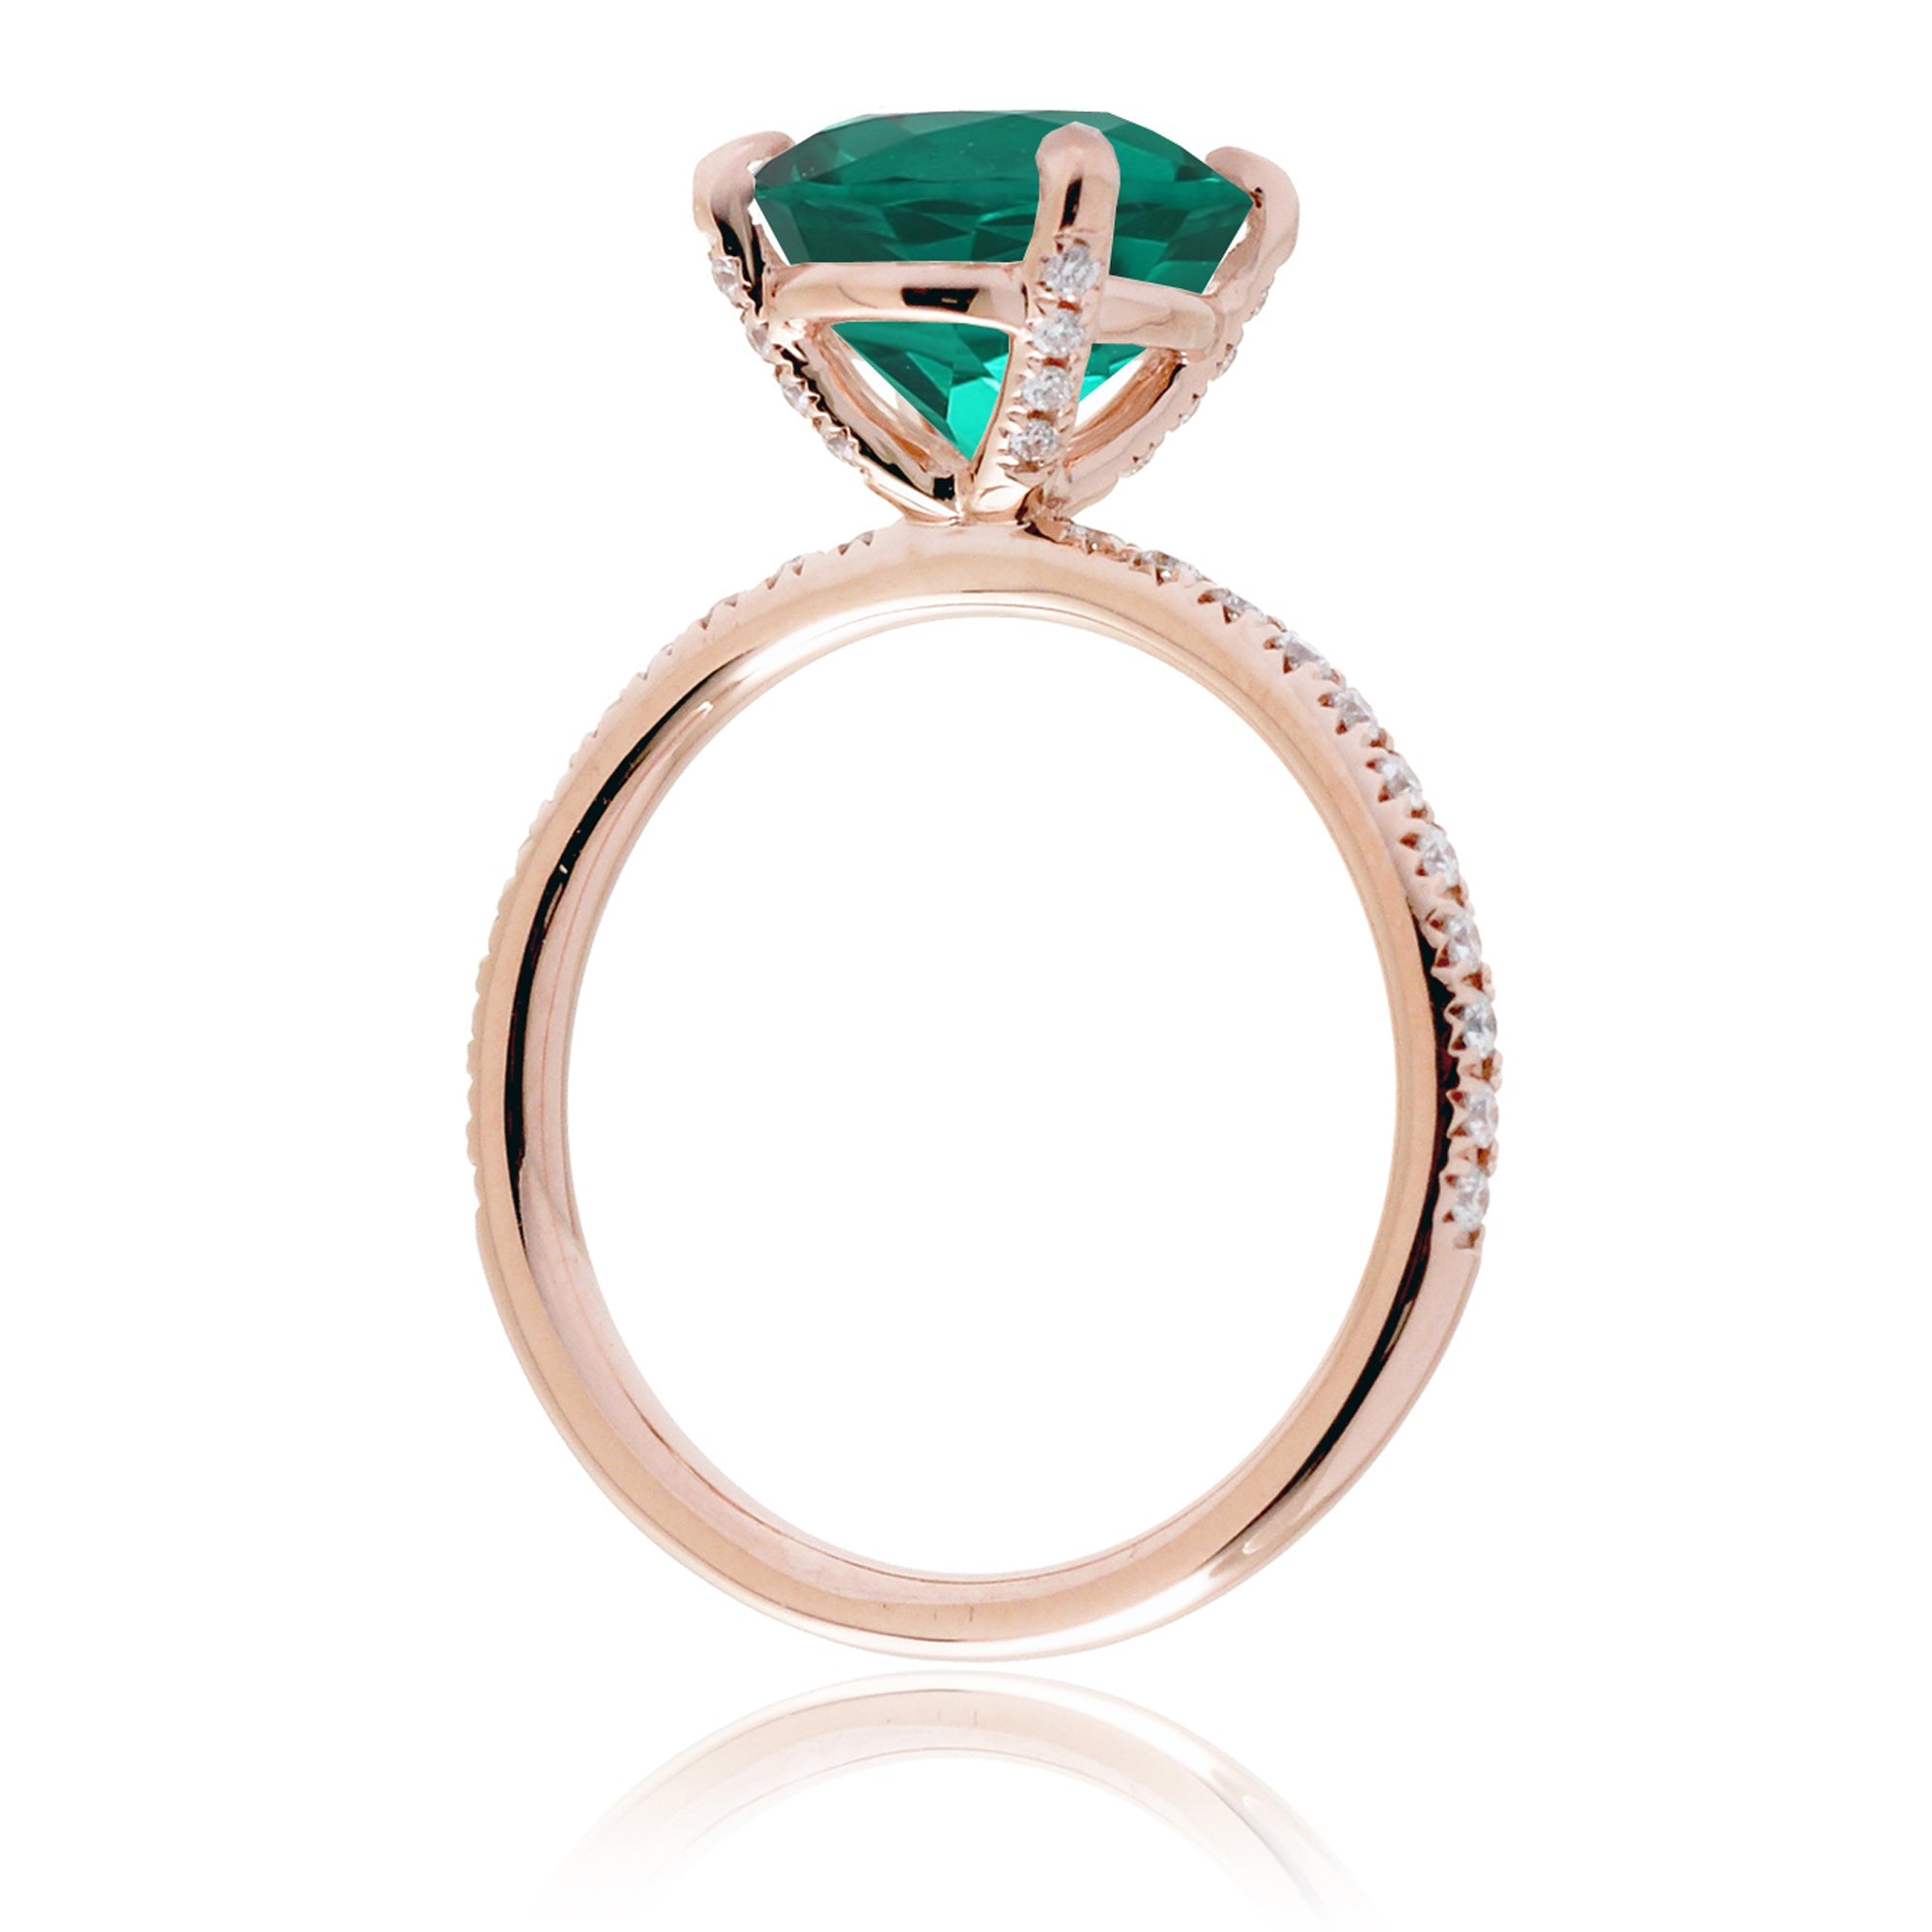 Oval green emerald diamond band engagement ring rose gold - the Ava